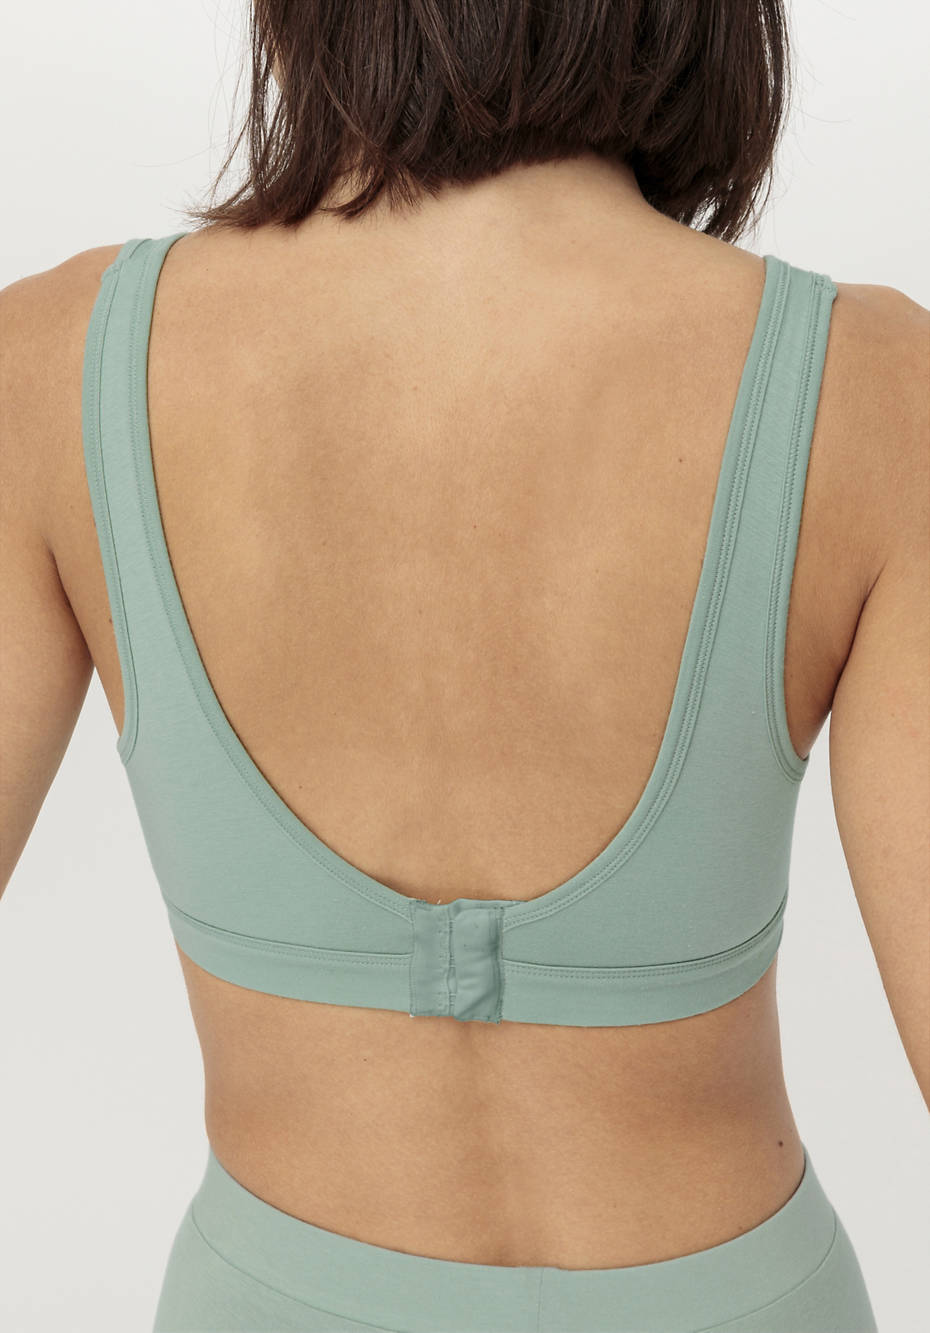 Bustier bra made from organic cotton and Tencel™ modal 5472609